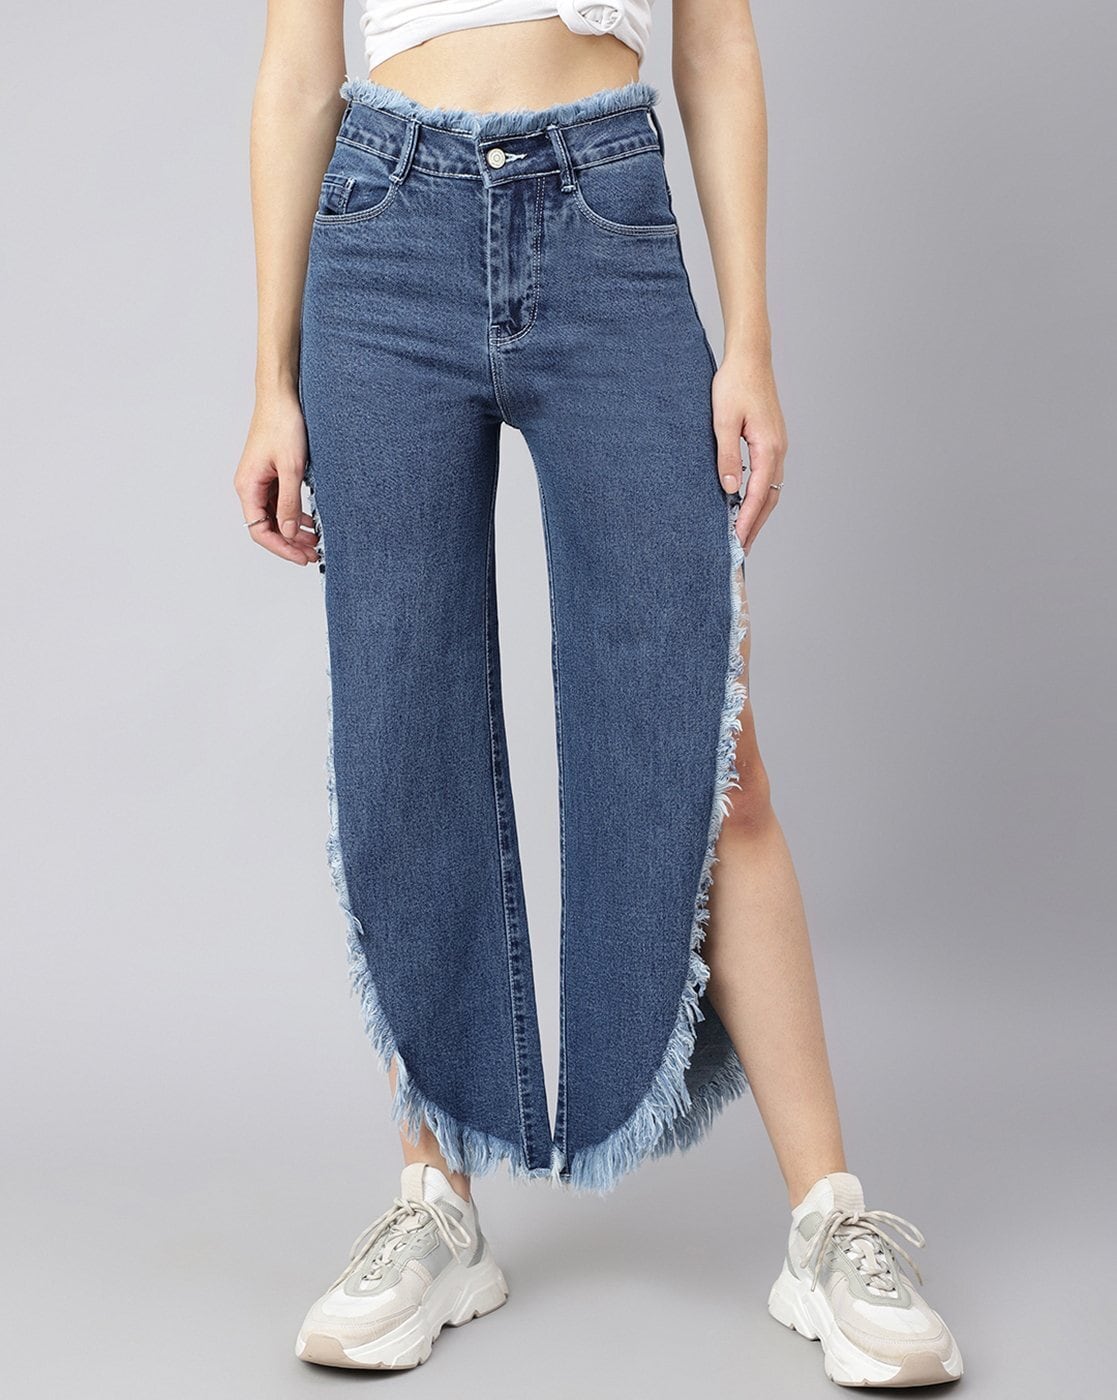 Jeans Under 500 - Buy Jeans Under 500 online in India